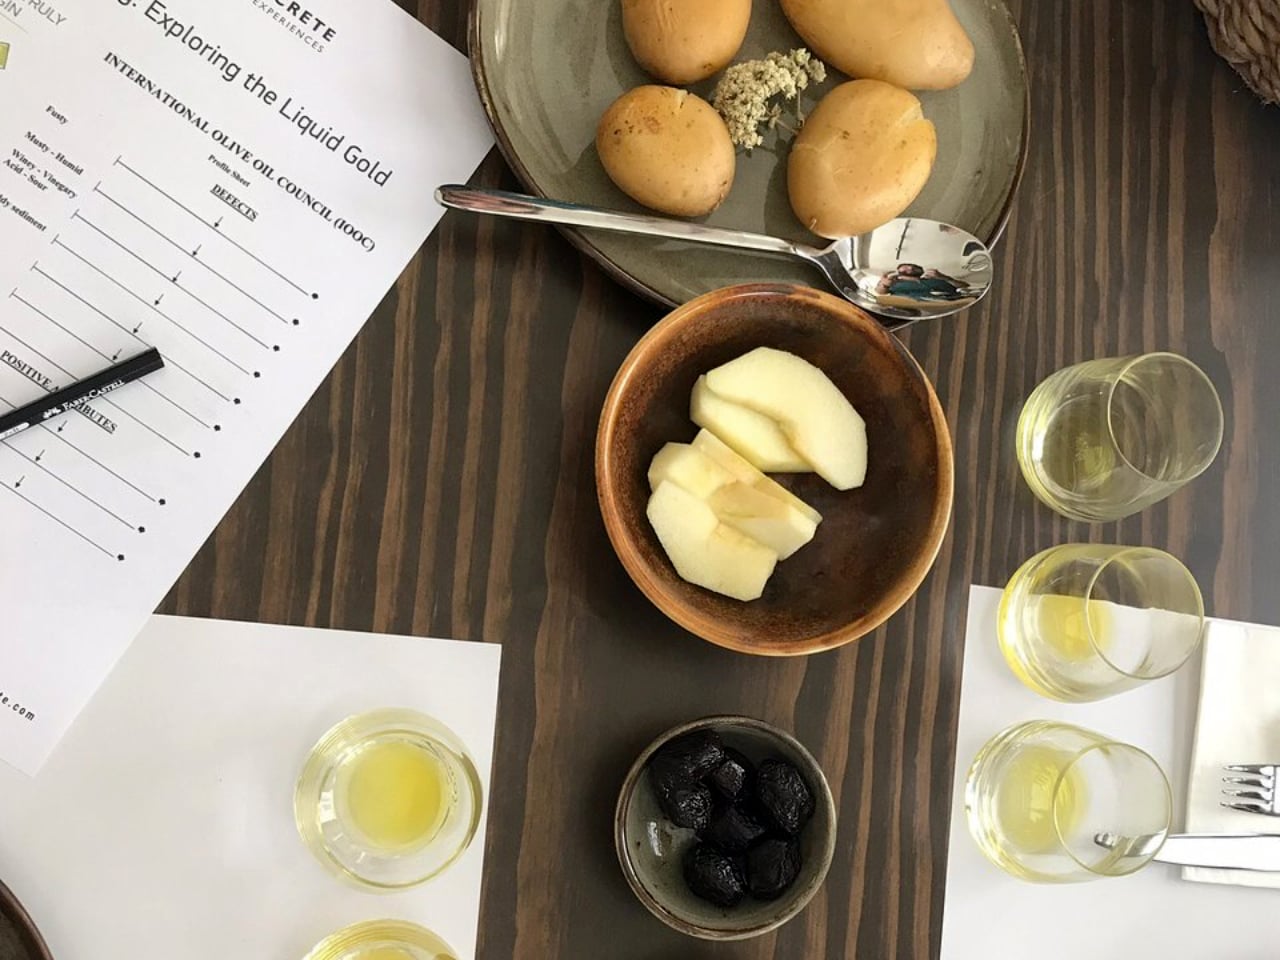 Best gastronomy experience in Heraklion Crete, Tasting The Food, Wine & Olive Oil Of Crete, cooking workshop, wine tasting iraklion crete, olive oil tasting heraklion crete, heraklion activities, irakliion things to do, cooking class with locals, cretan virgin olive oil tasting